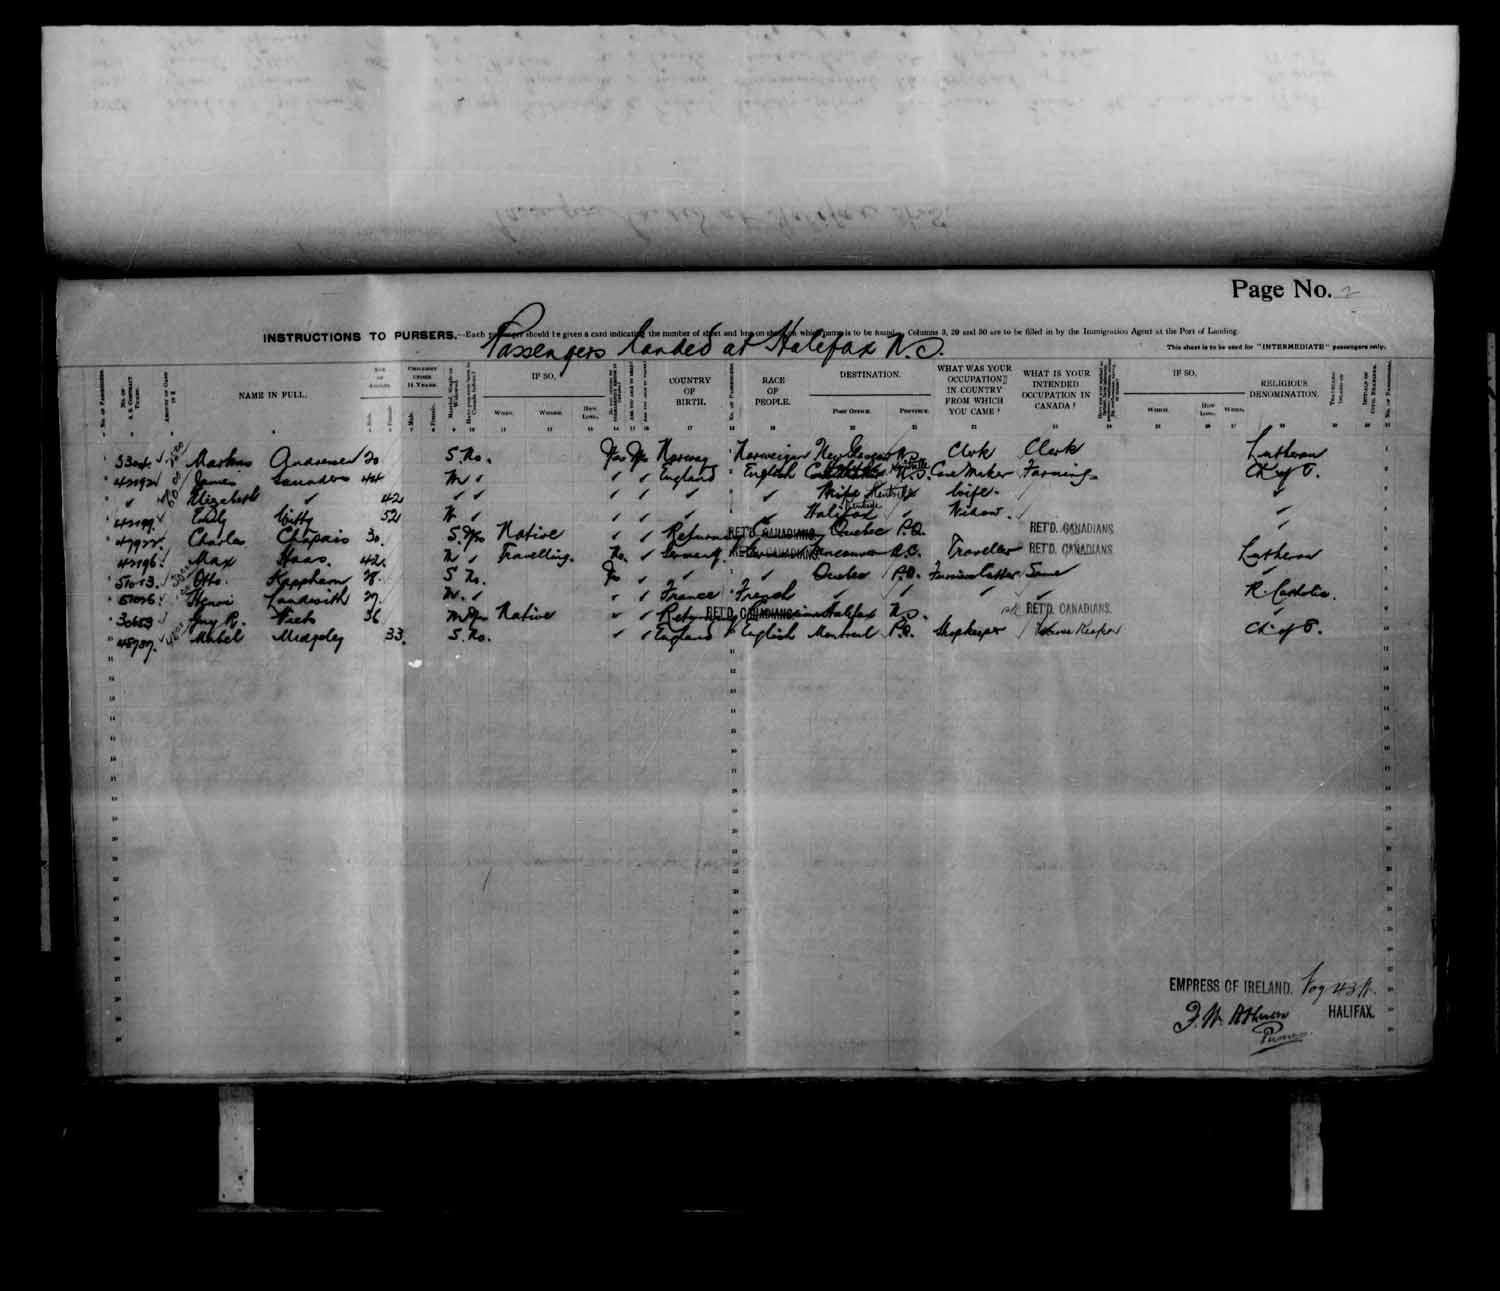 Digitized page of Quebec Passenger Lists for Image No.: e003683615